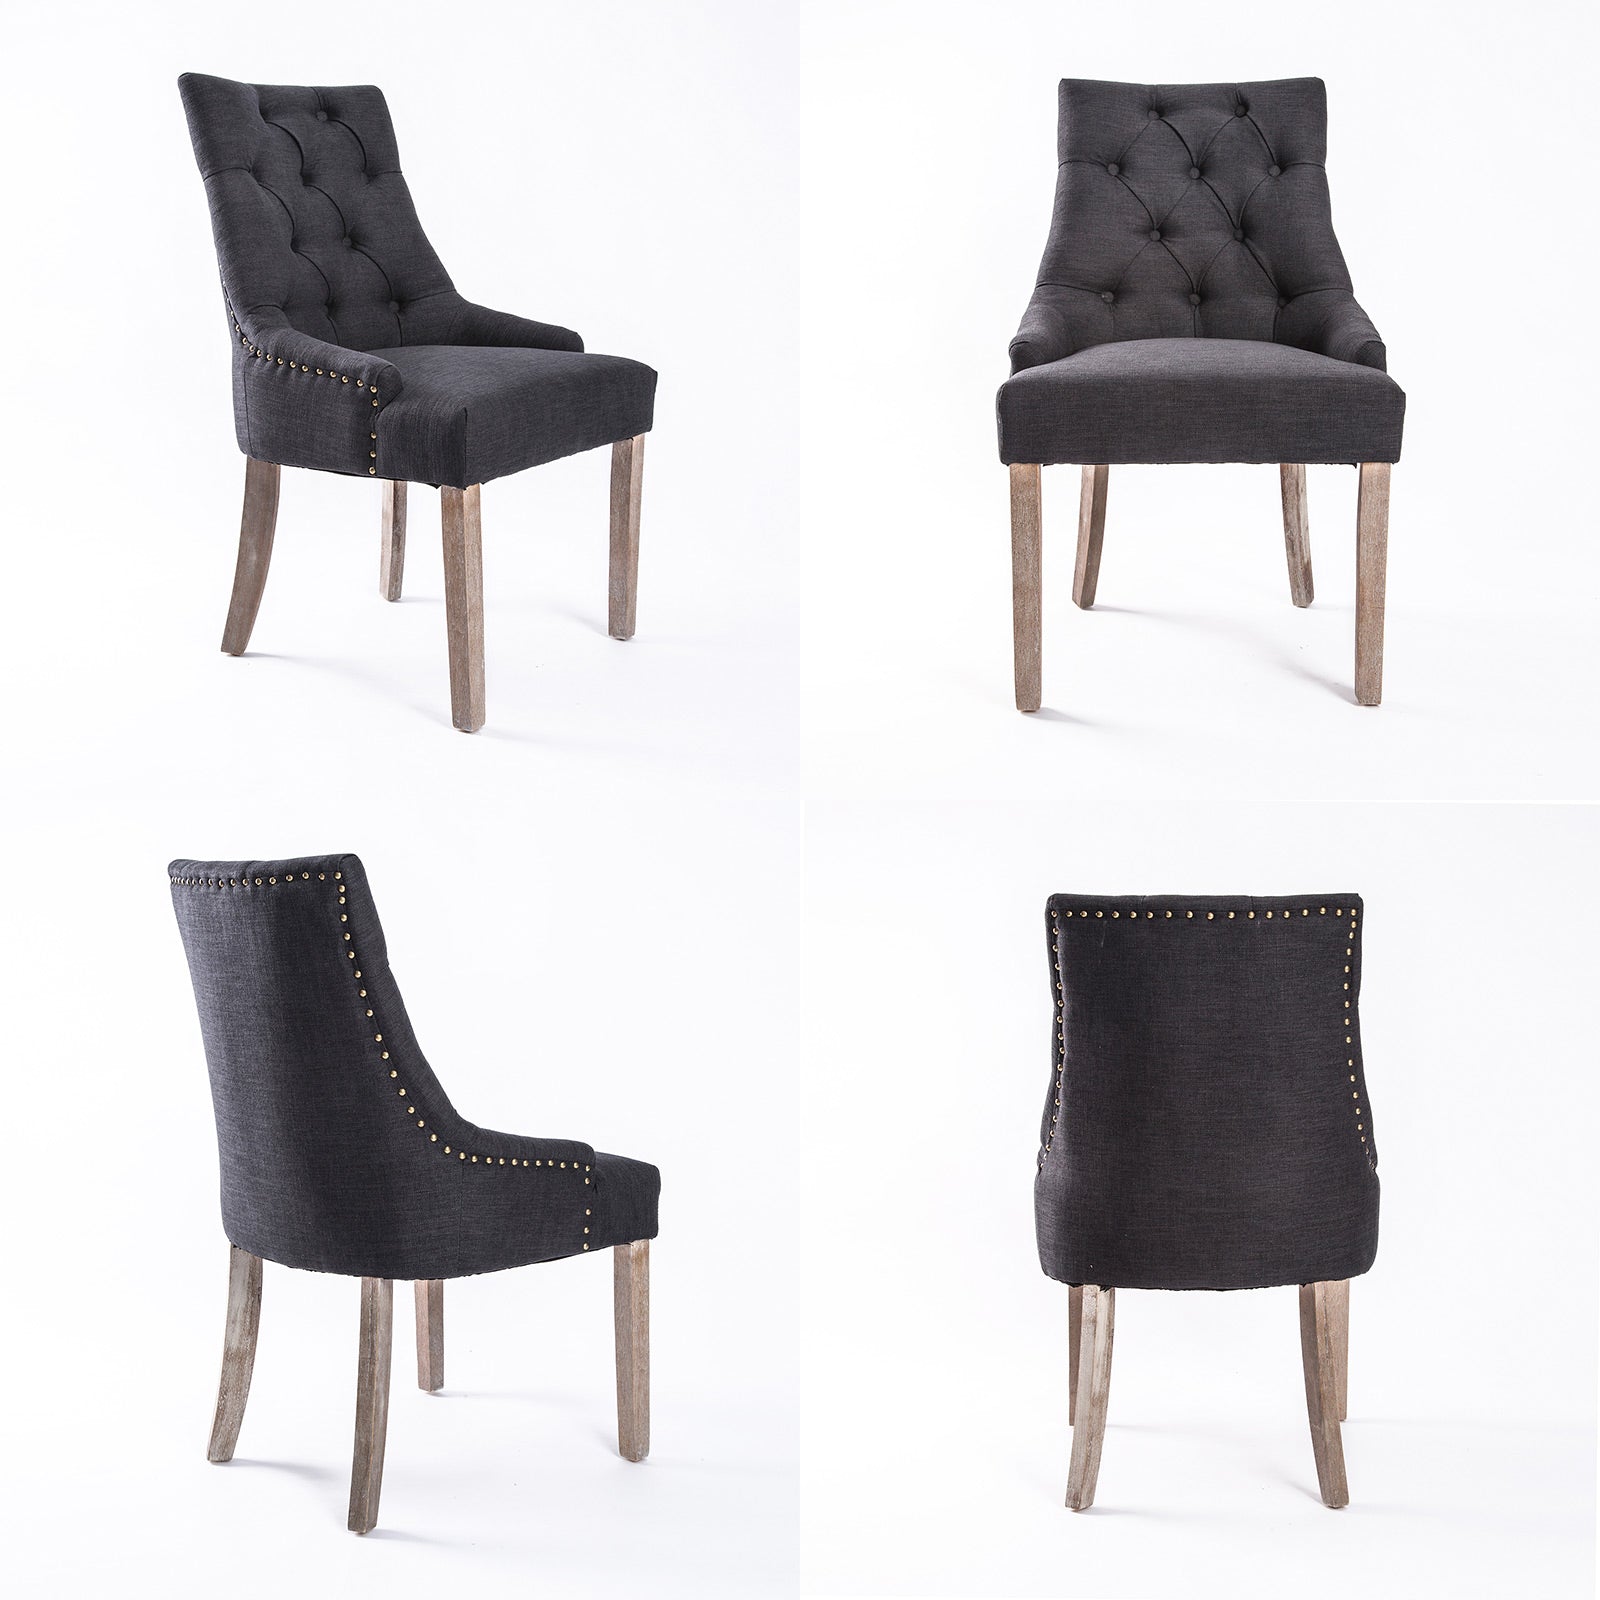 Black (Charcoal) French Provincial Dining Chair Amour Oak Leg - image4